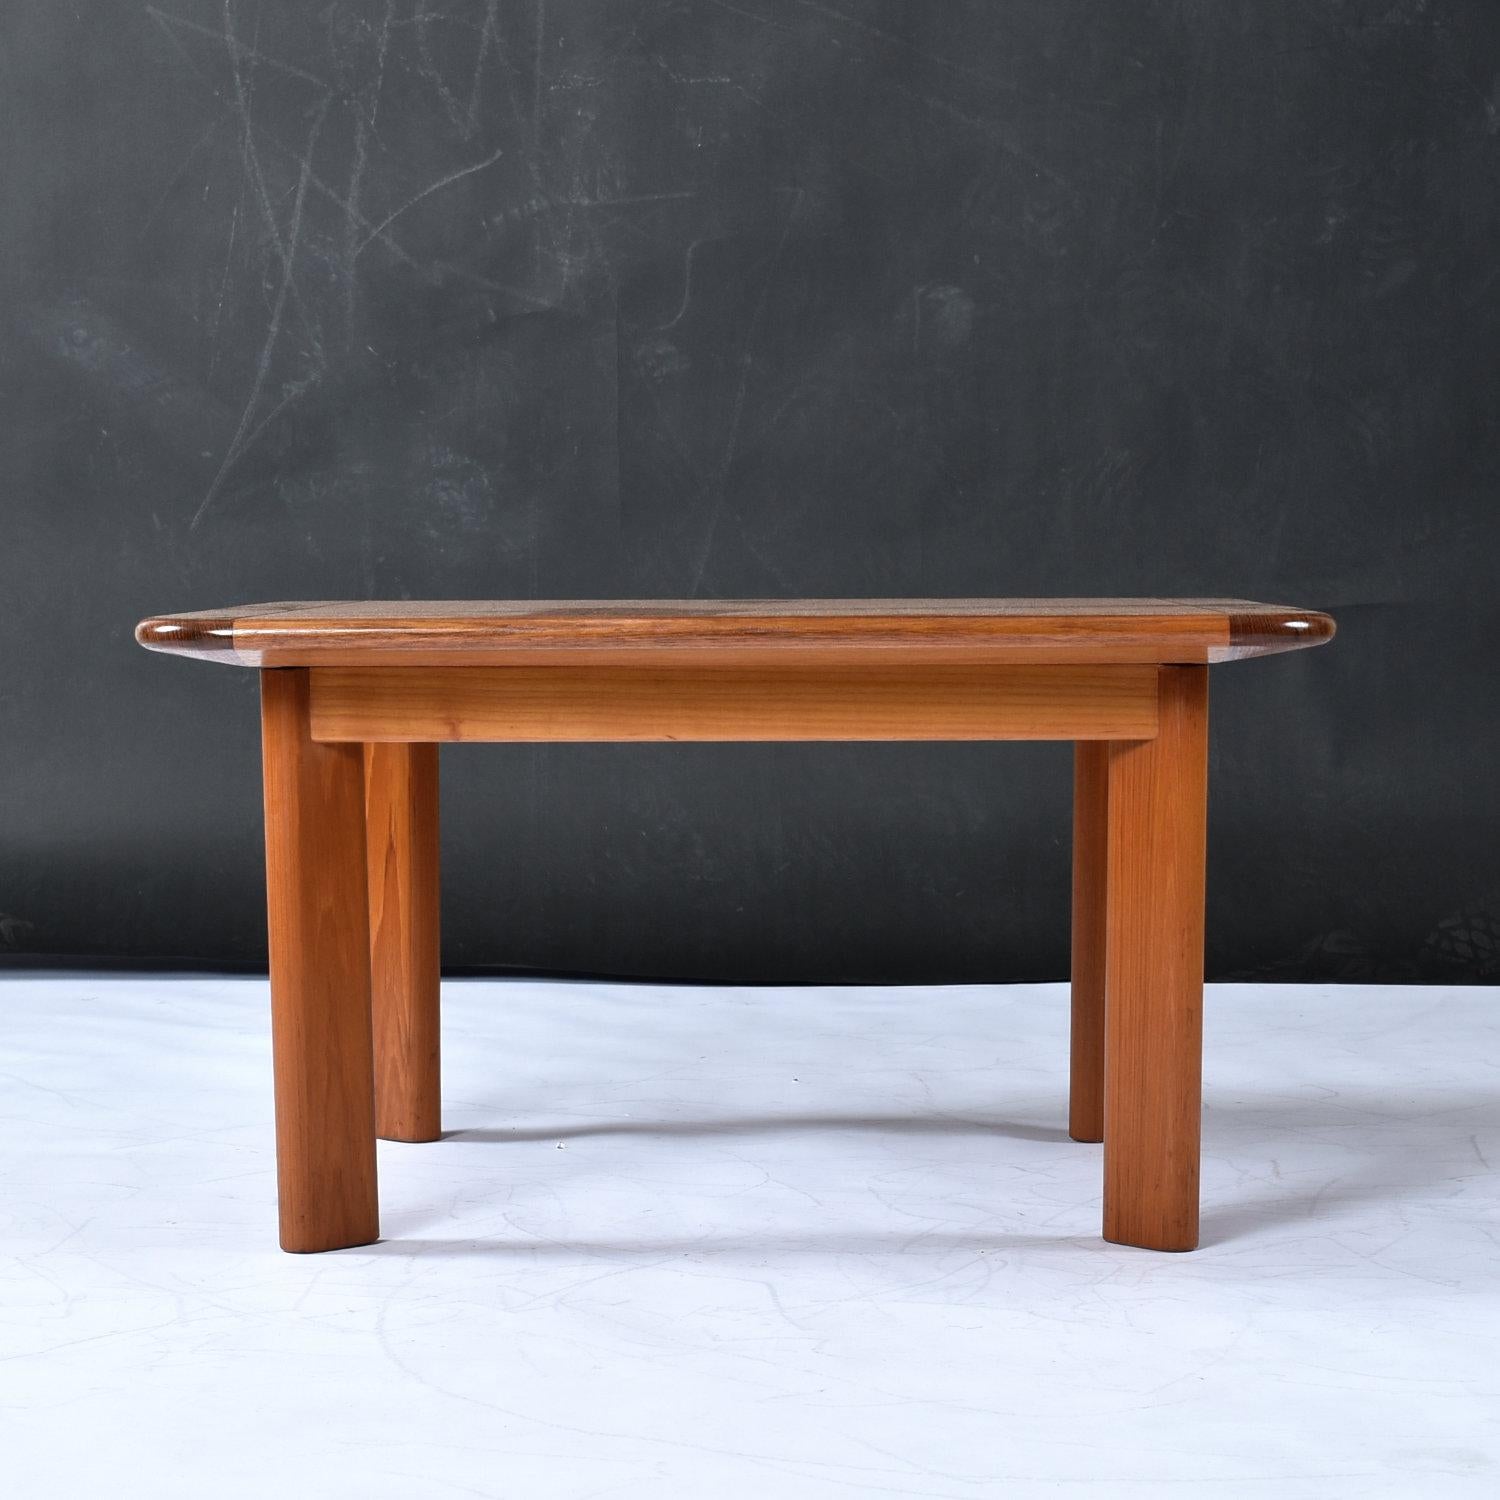 Canadian Refinished Vintage Danish Modern Solid Teak Square Coffee Table For Sale